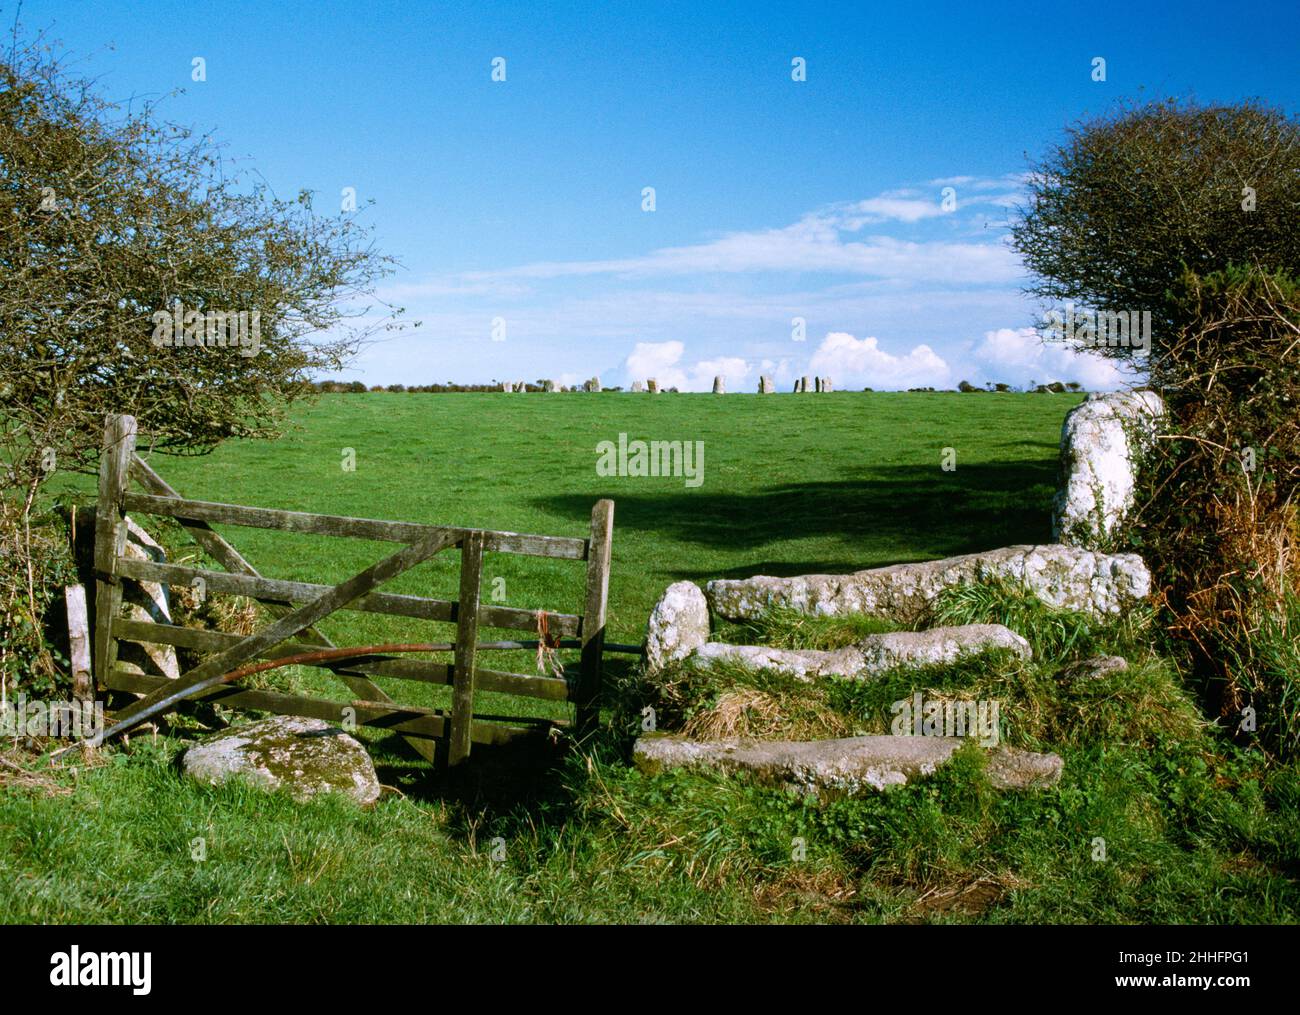 Boleigh Stone Stile & 5-barred wooden gate giving access to field containing Merry Maidens Stone Circle, Boleigh, Cornwall, England. Stock Photo